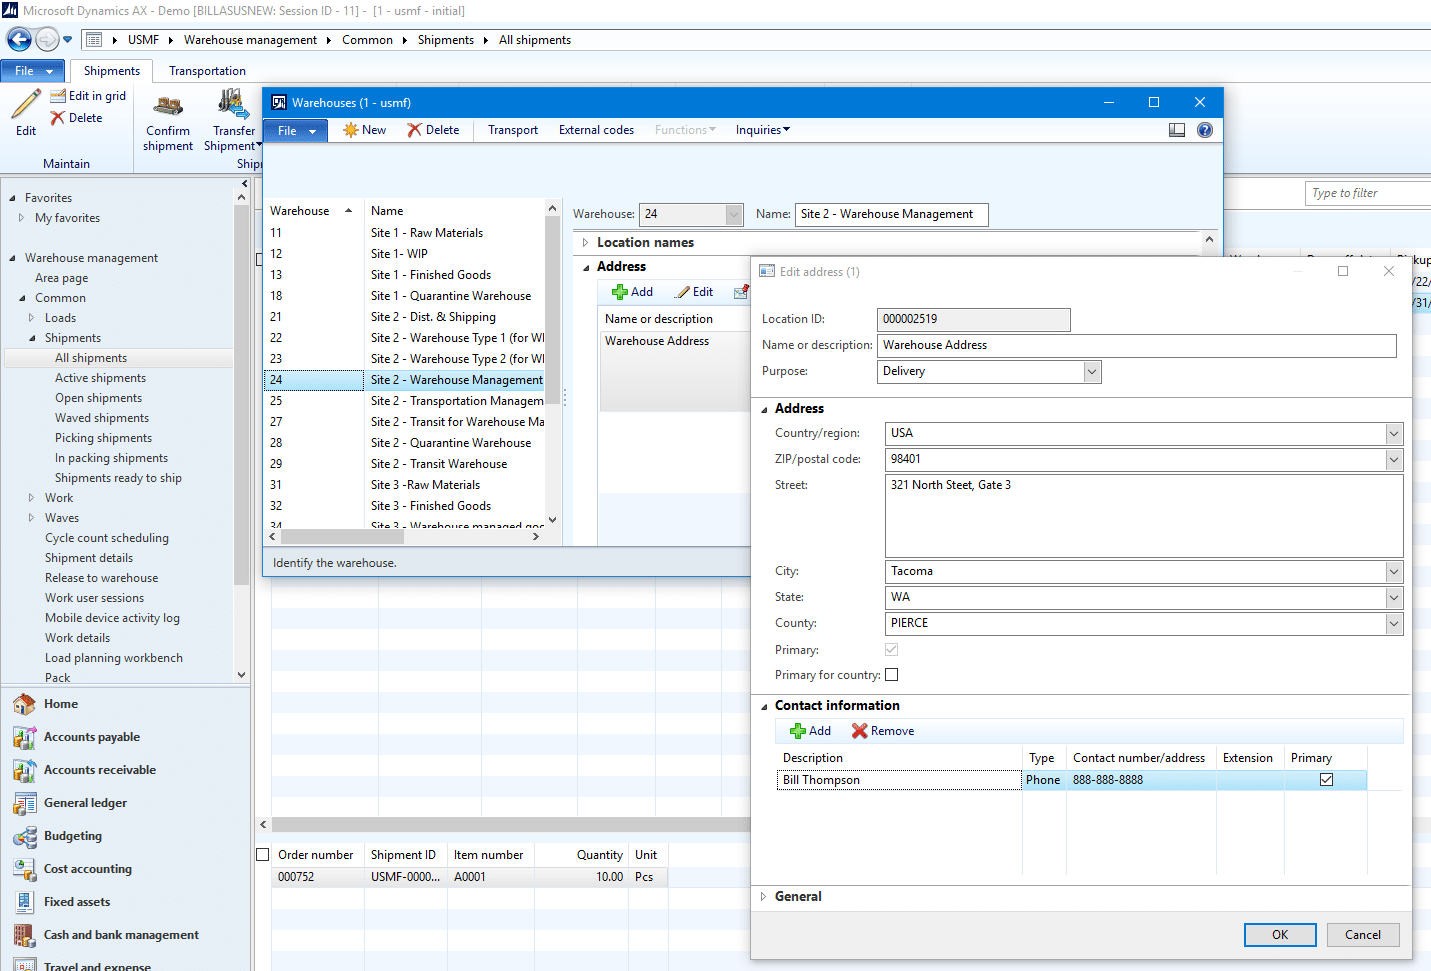 Locating primary contact information for a specific warehouse using dynamics ax